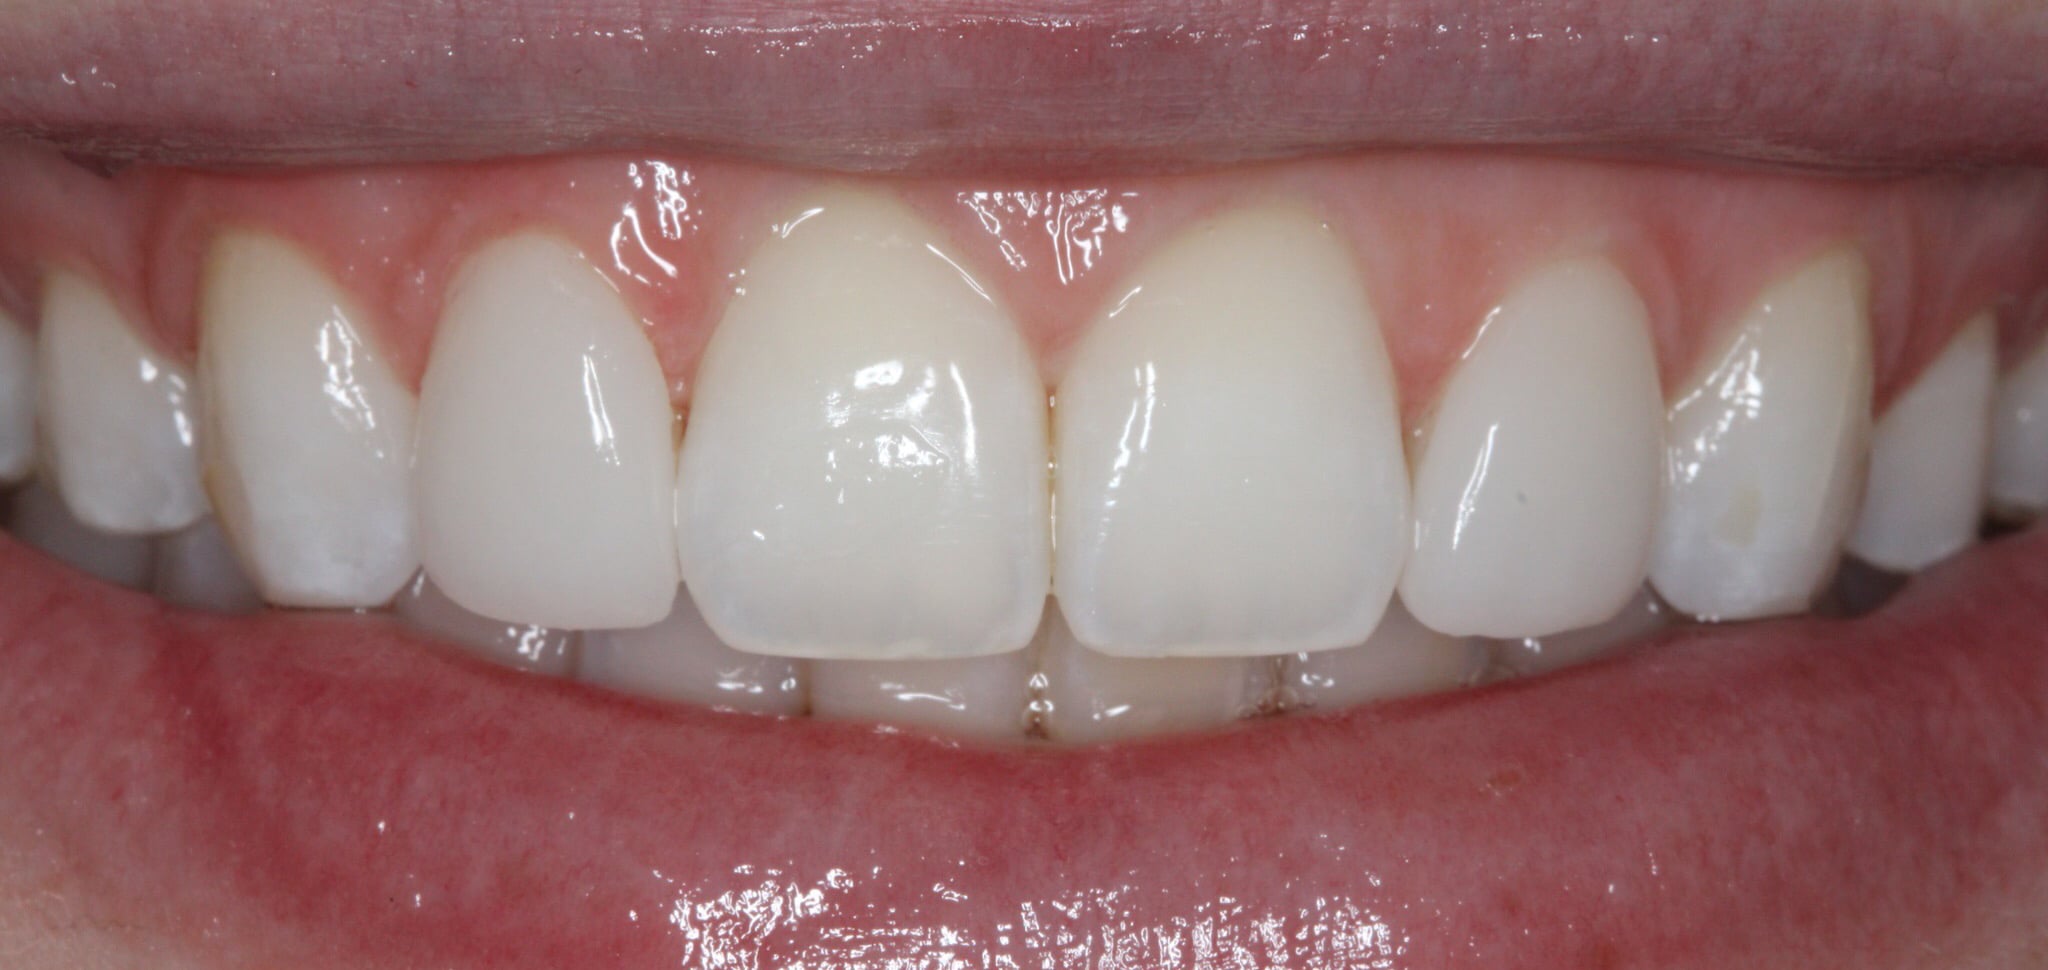 59877 Prepless veneers Featured Image 3 after